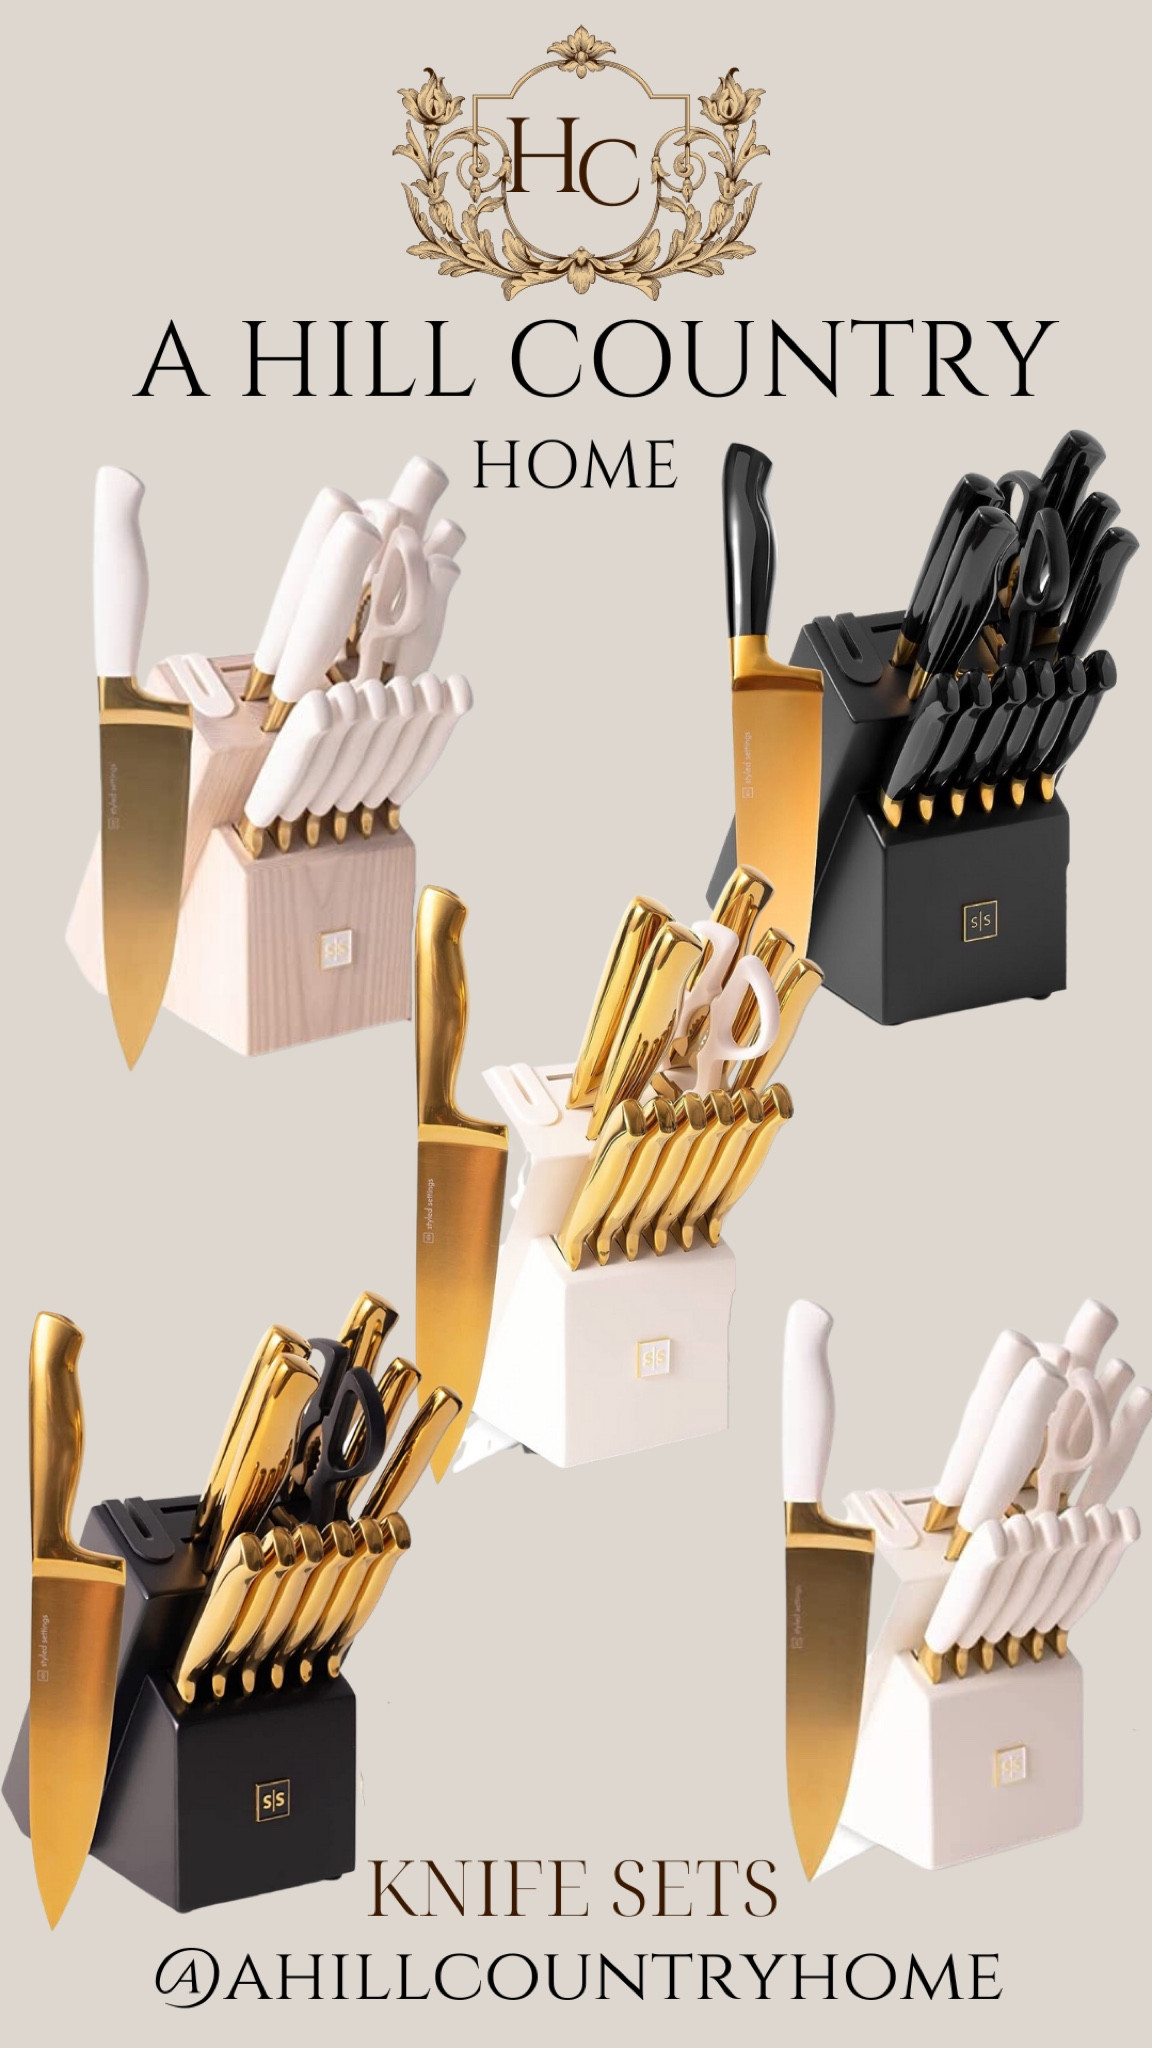 Black and Gold Knife Set with Sharpener- 14 PC Gold Knife Set with Block  and Sharpener Includes Full Tang Black and Gold Knives & Self Sharpening